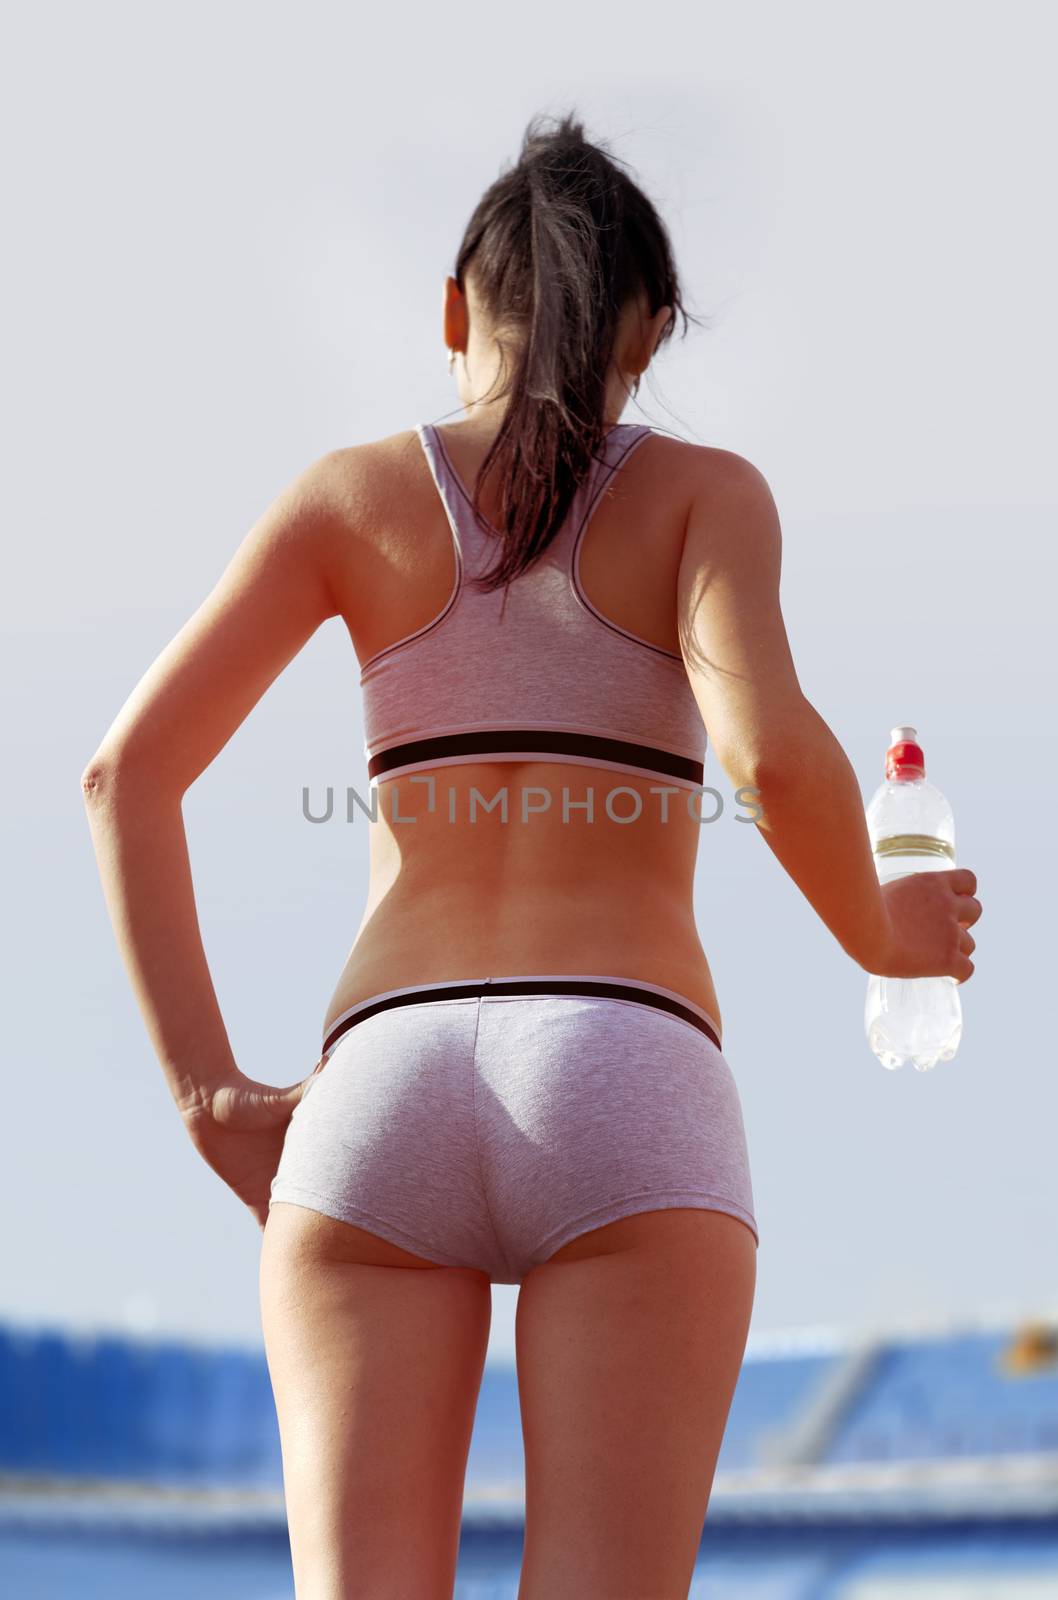 back of woman with bottle by ssuaphoto